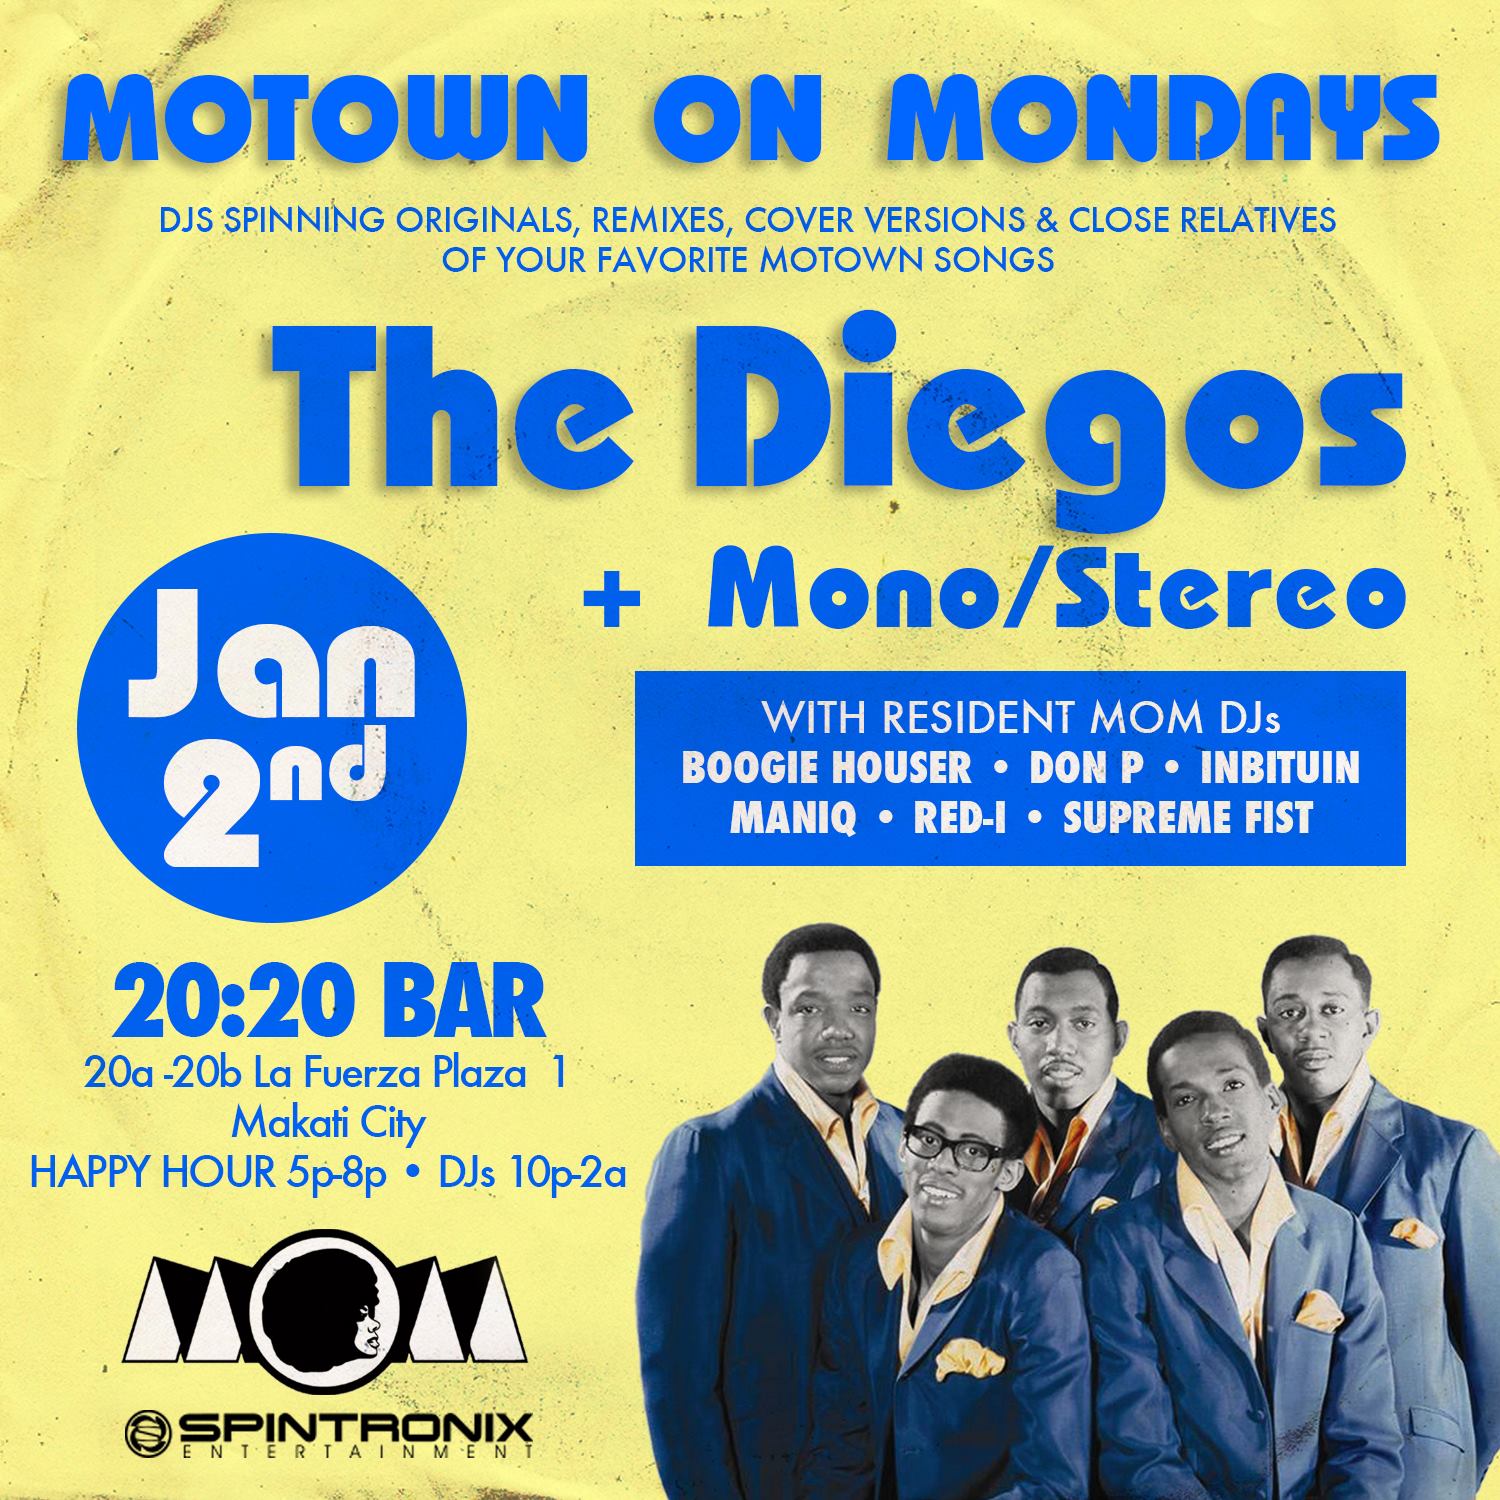 Motown On Mondays Manila - The Diegos + Mono/Stereo Takeover clock Monday, January 2 at 10 PM - 12 AM Jan 2 at 10 PM to Jan 3 at 12 AM pin Show Map Motown On Mondays Manila 20a-20b La Fuerza Plaza 1, 2241 Chino Roces Avenue, Makati, Philippines About Discussion Write Post Add Photo / Video Create Poll Details Motown On Mondays Manila A Brand New Weekly Dance Party! Every Mondays at 20:20 Bar in Makati DJs spinning originals, remixes, cover versions & close relatives of your favorite Motown songs This Week Featuring Special Guest The Diegos Mono/Stereo With MOM Residents DJs Boogie Houser Don P iNBiTuiN MaNiq Red-I Supreme Fist Happy Hour 5p-8p DJs 10p-2a FREE ALL NIGHT